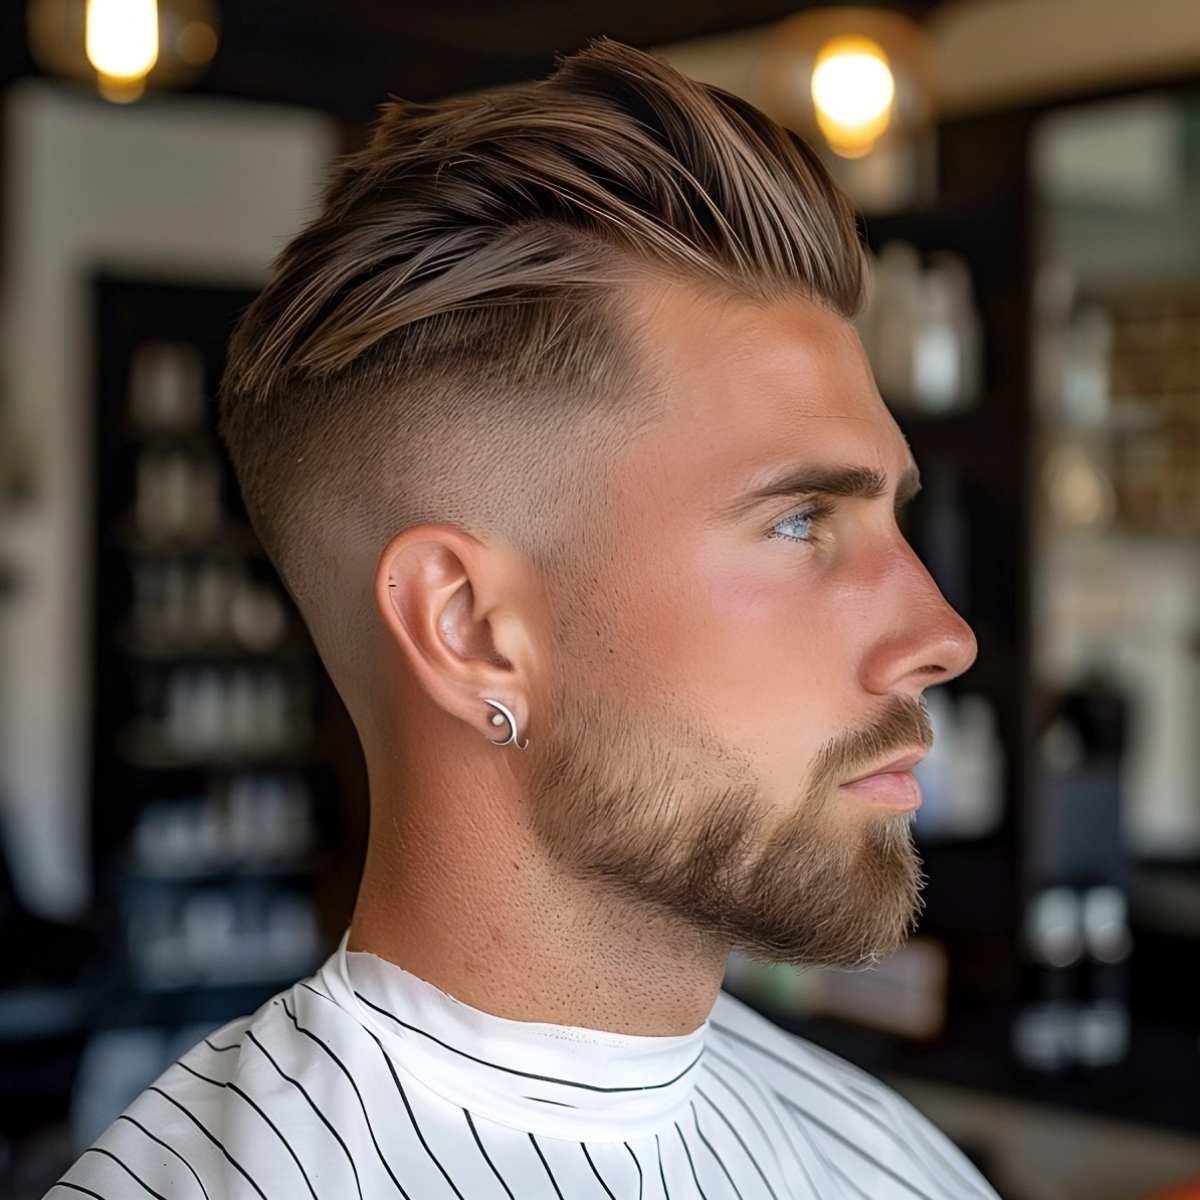 7 Cool Hairstyles For Guys – Coolest Hairstyles & Beards For Men. Grooming  Tips For Men